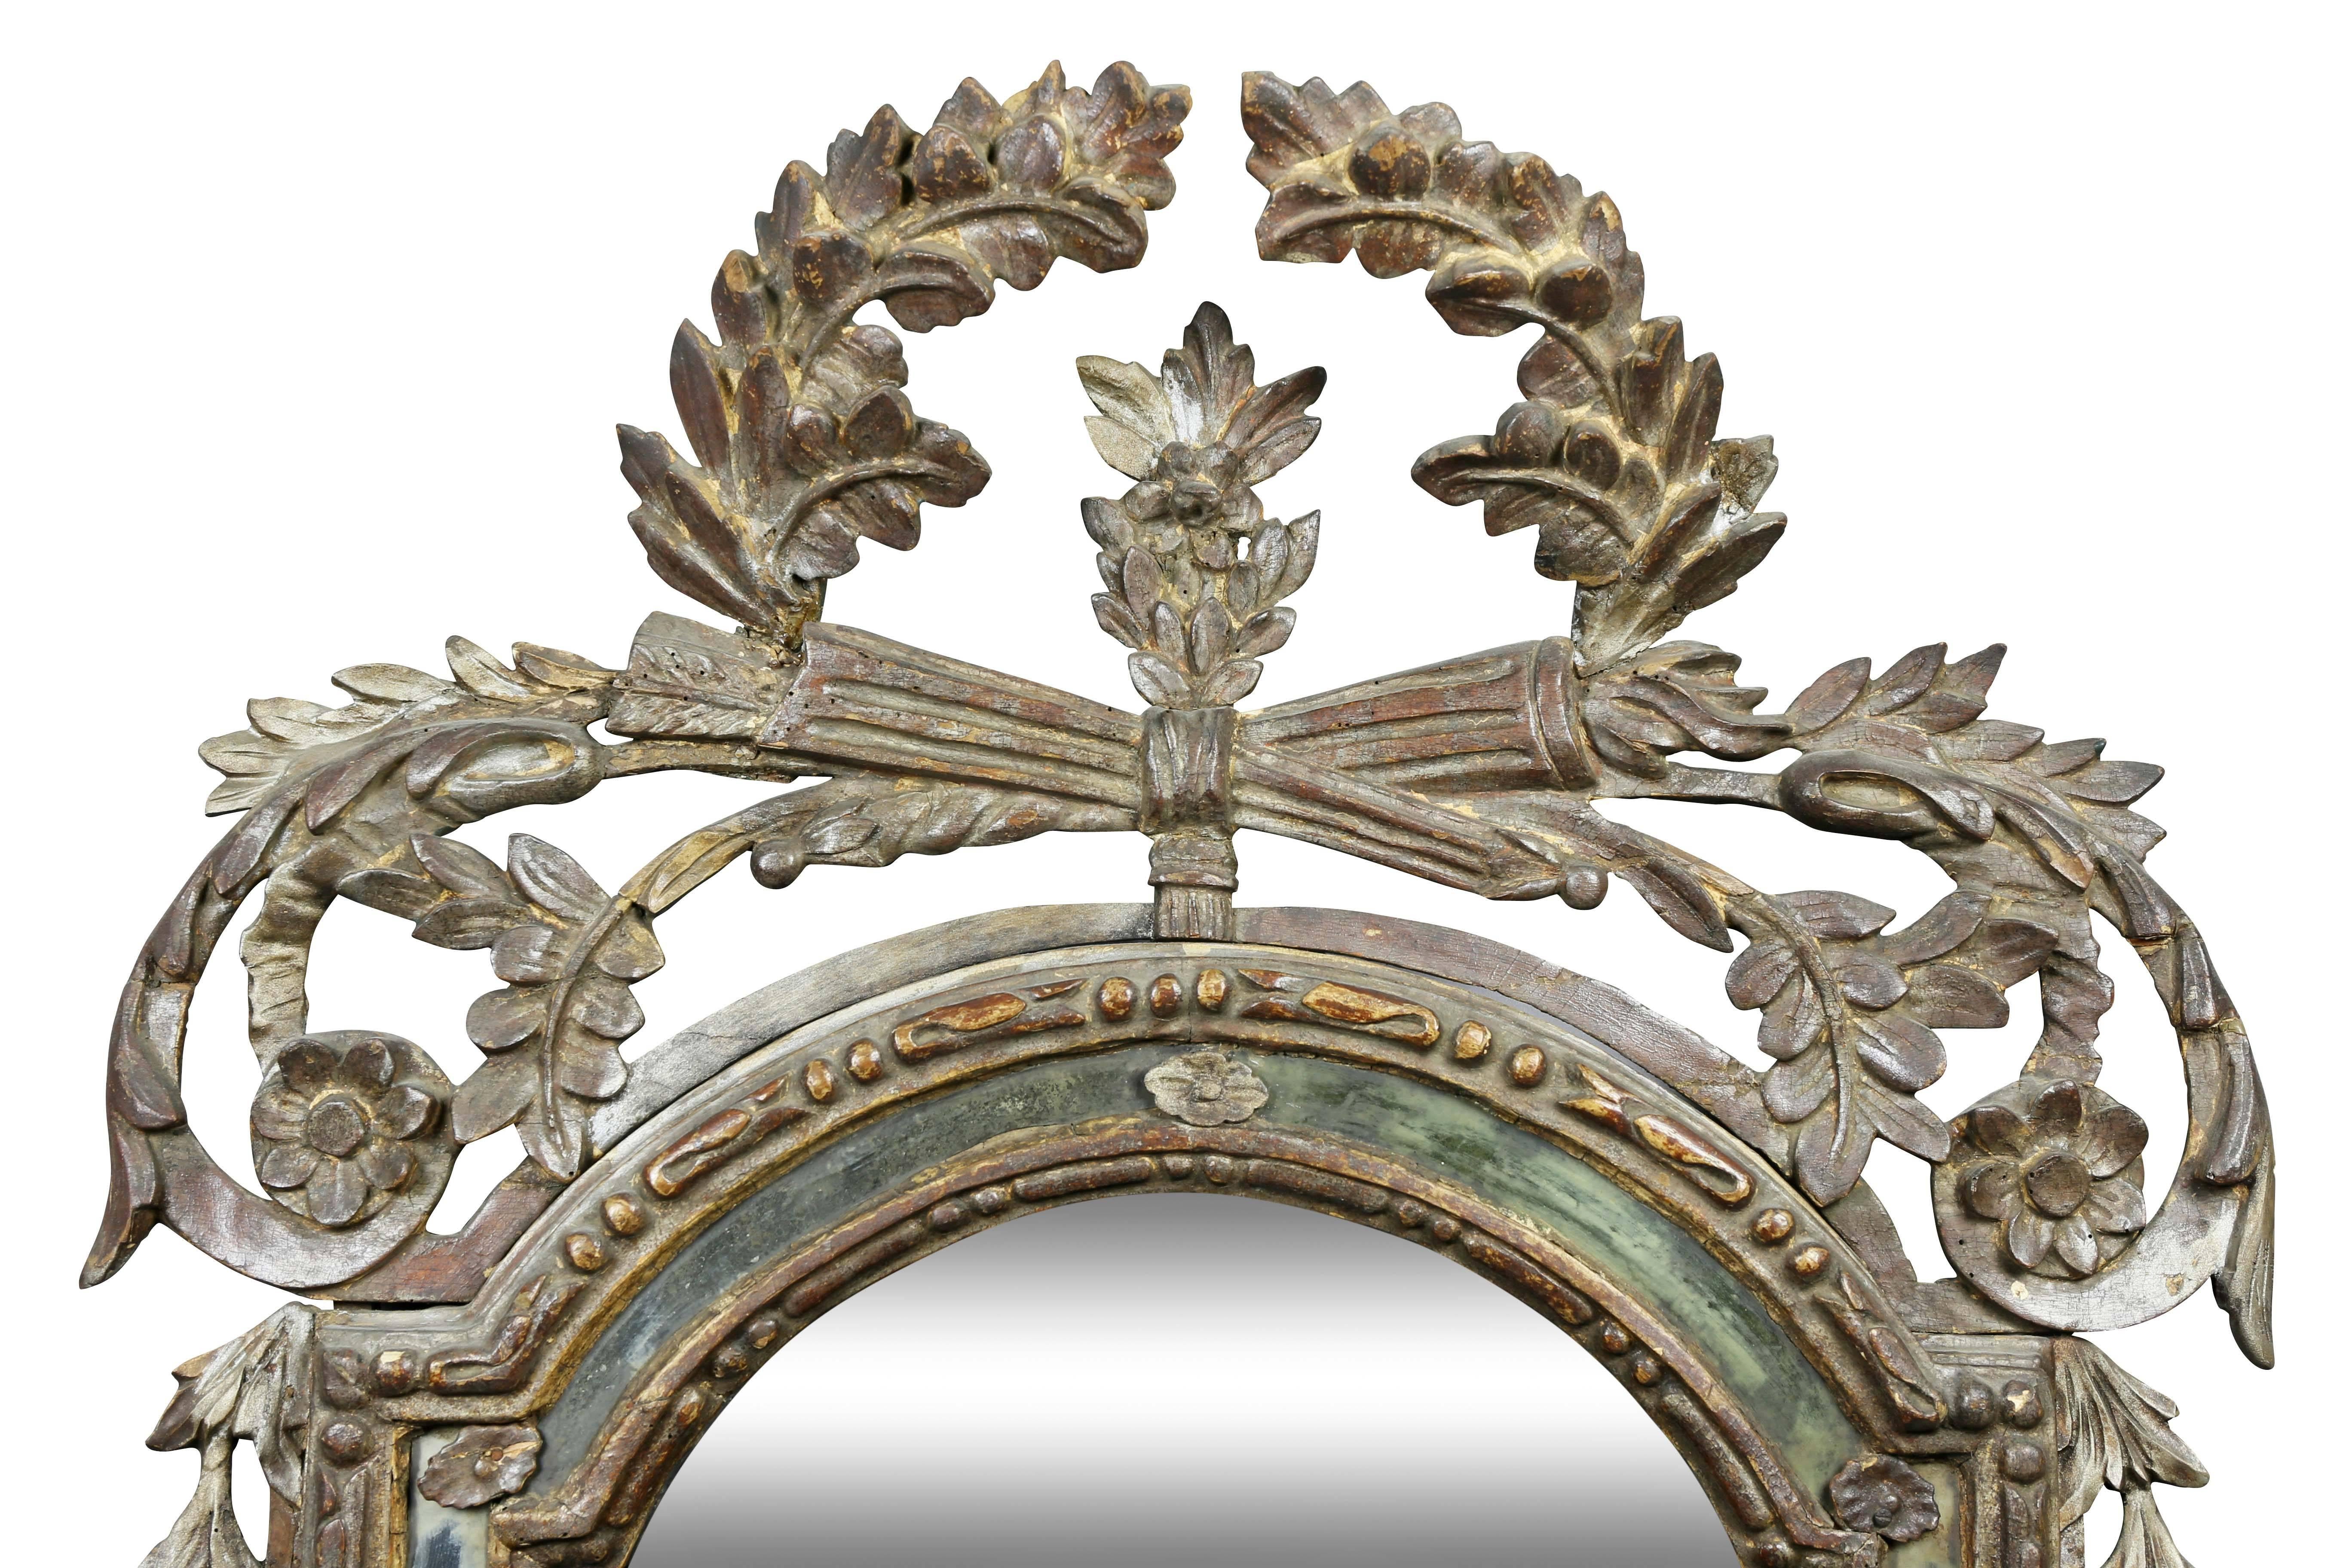 With arched wreath form crest over a mirror with an inner mirrored band, Fogg Estate, Boston Mass.